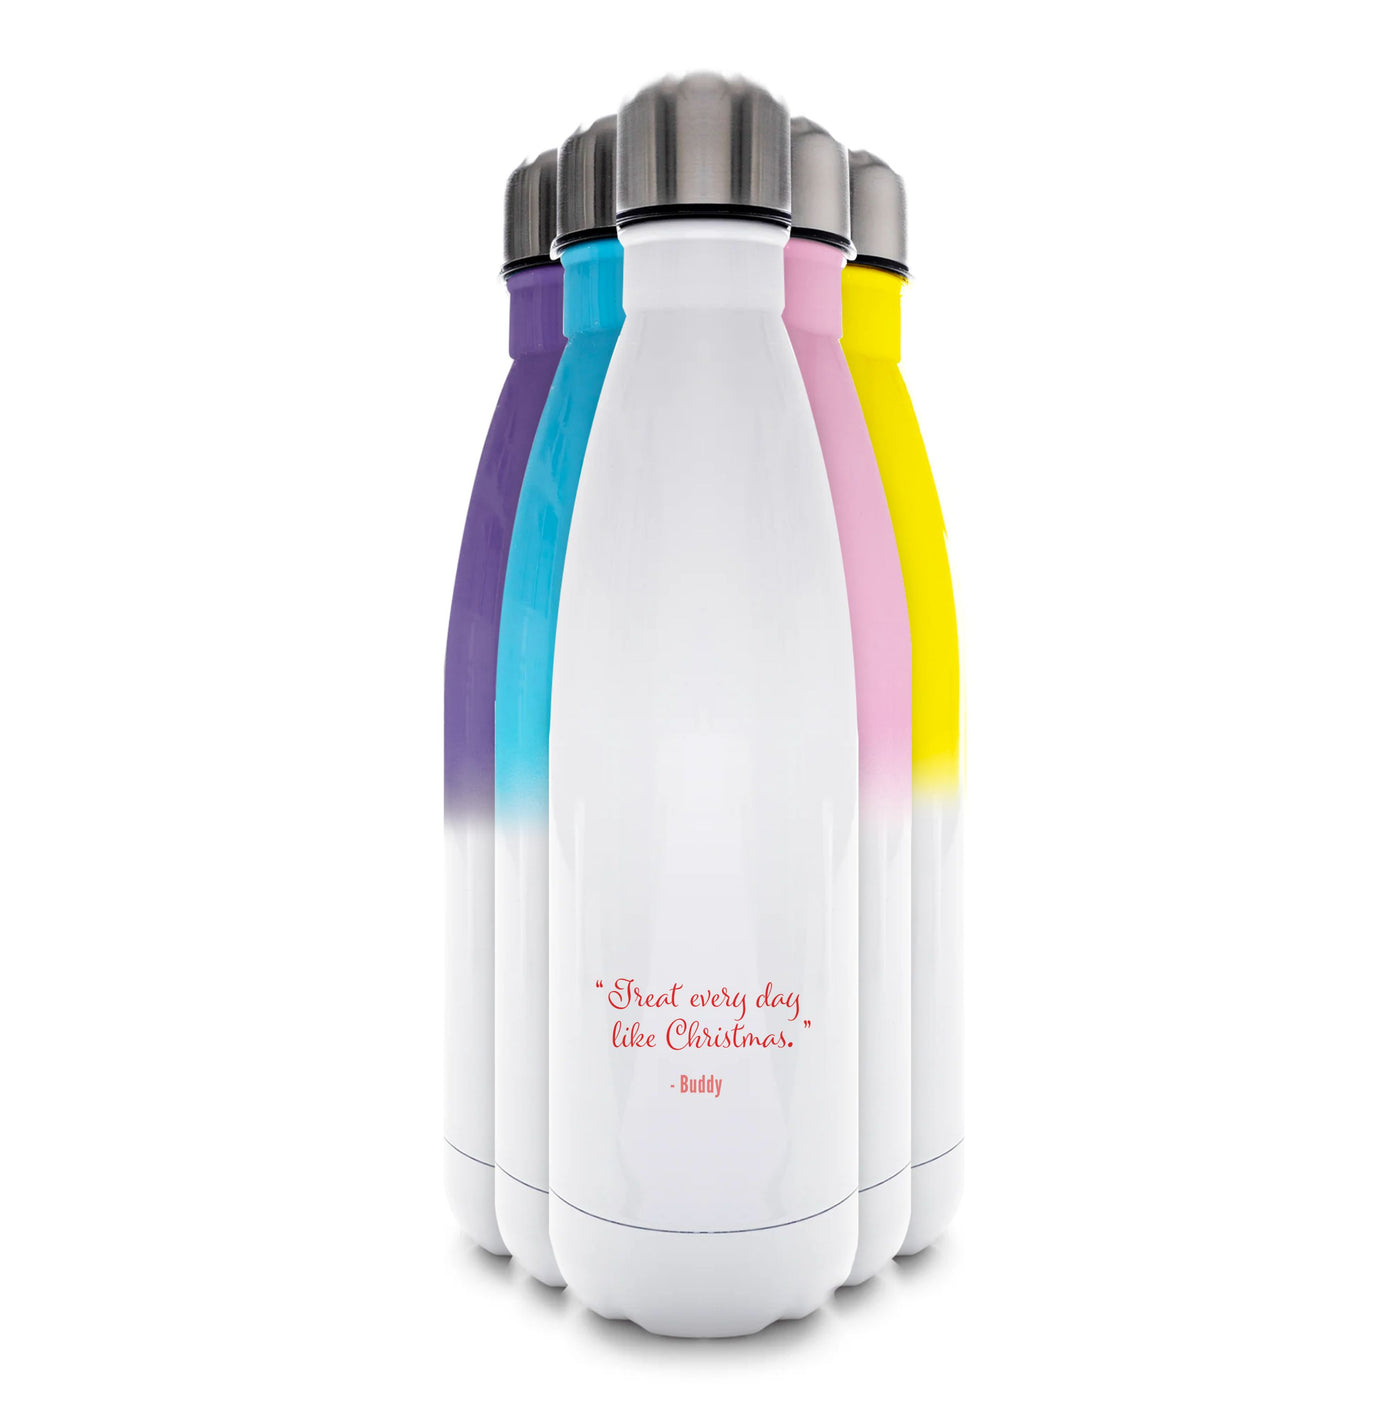 Treat Every Day Like Christmas - Elf Water Bottle